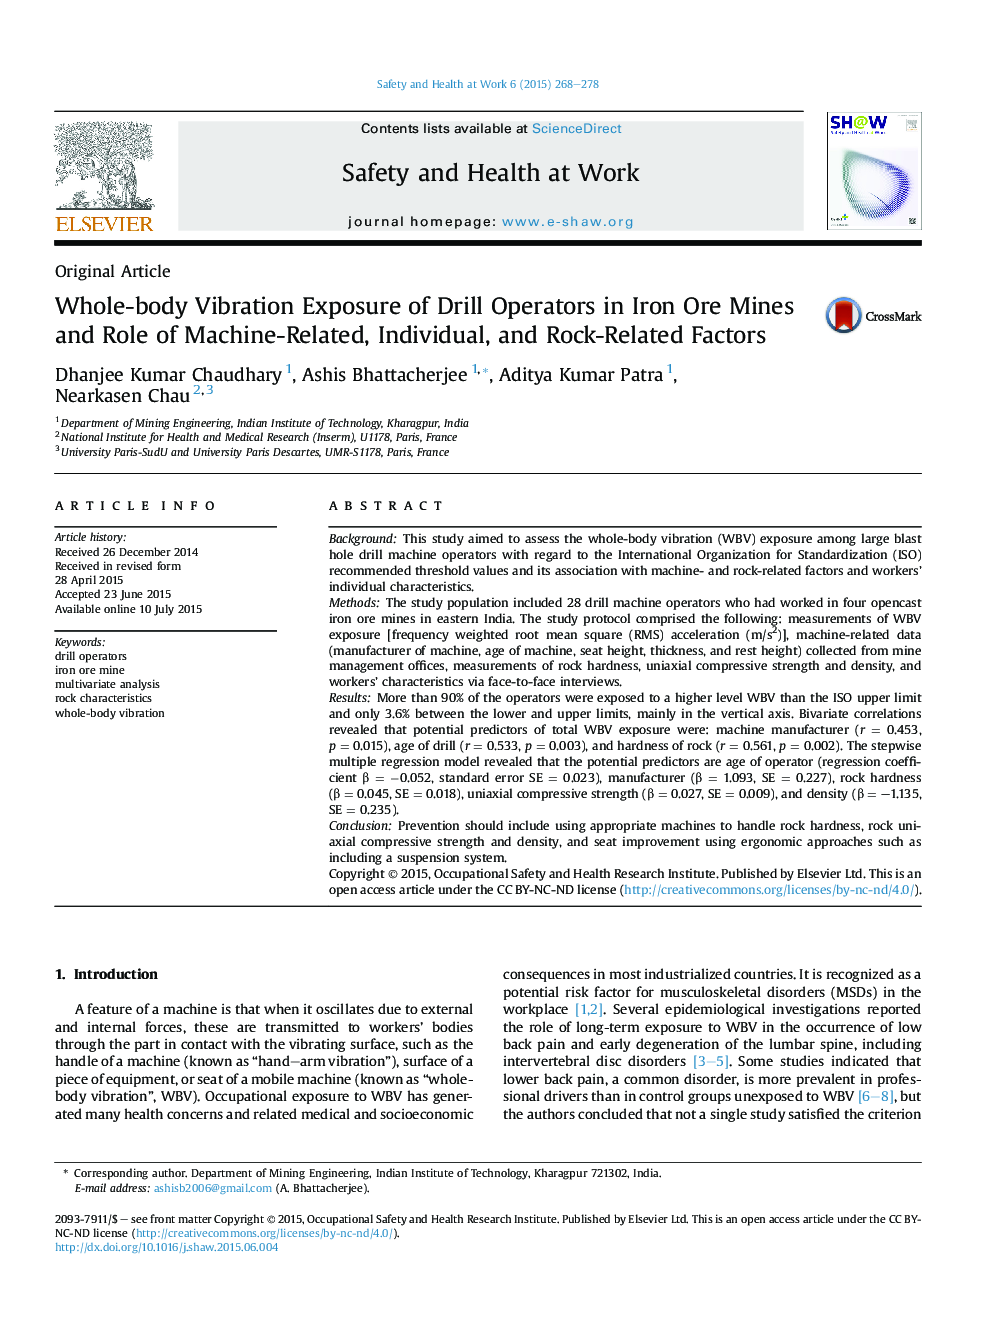 Whole-body Vibration Exposure of Drill Operators in Iron Ore Mines and Role of Machine-Related, Individual, and Rock-Related Factors 